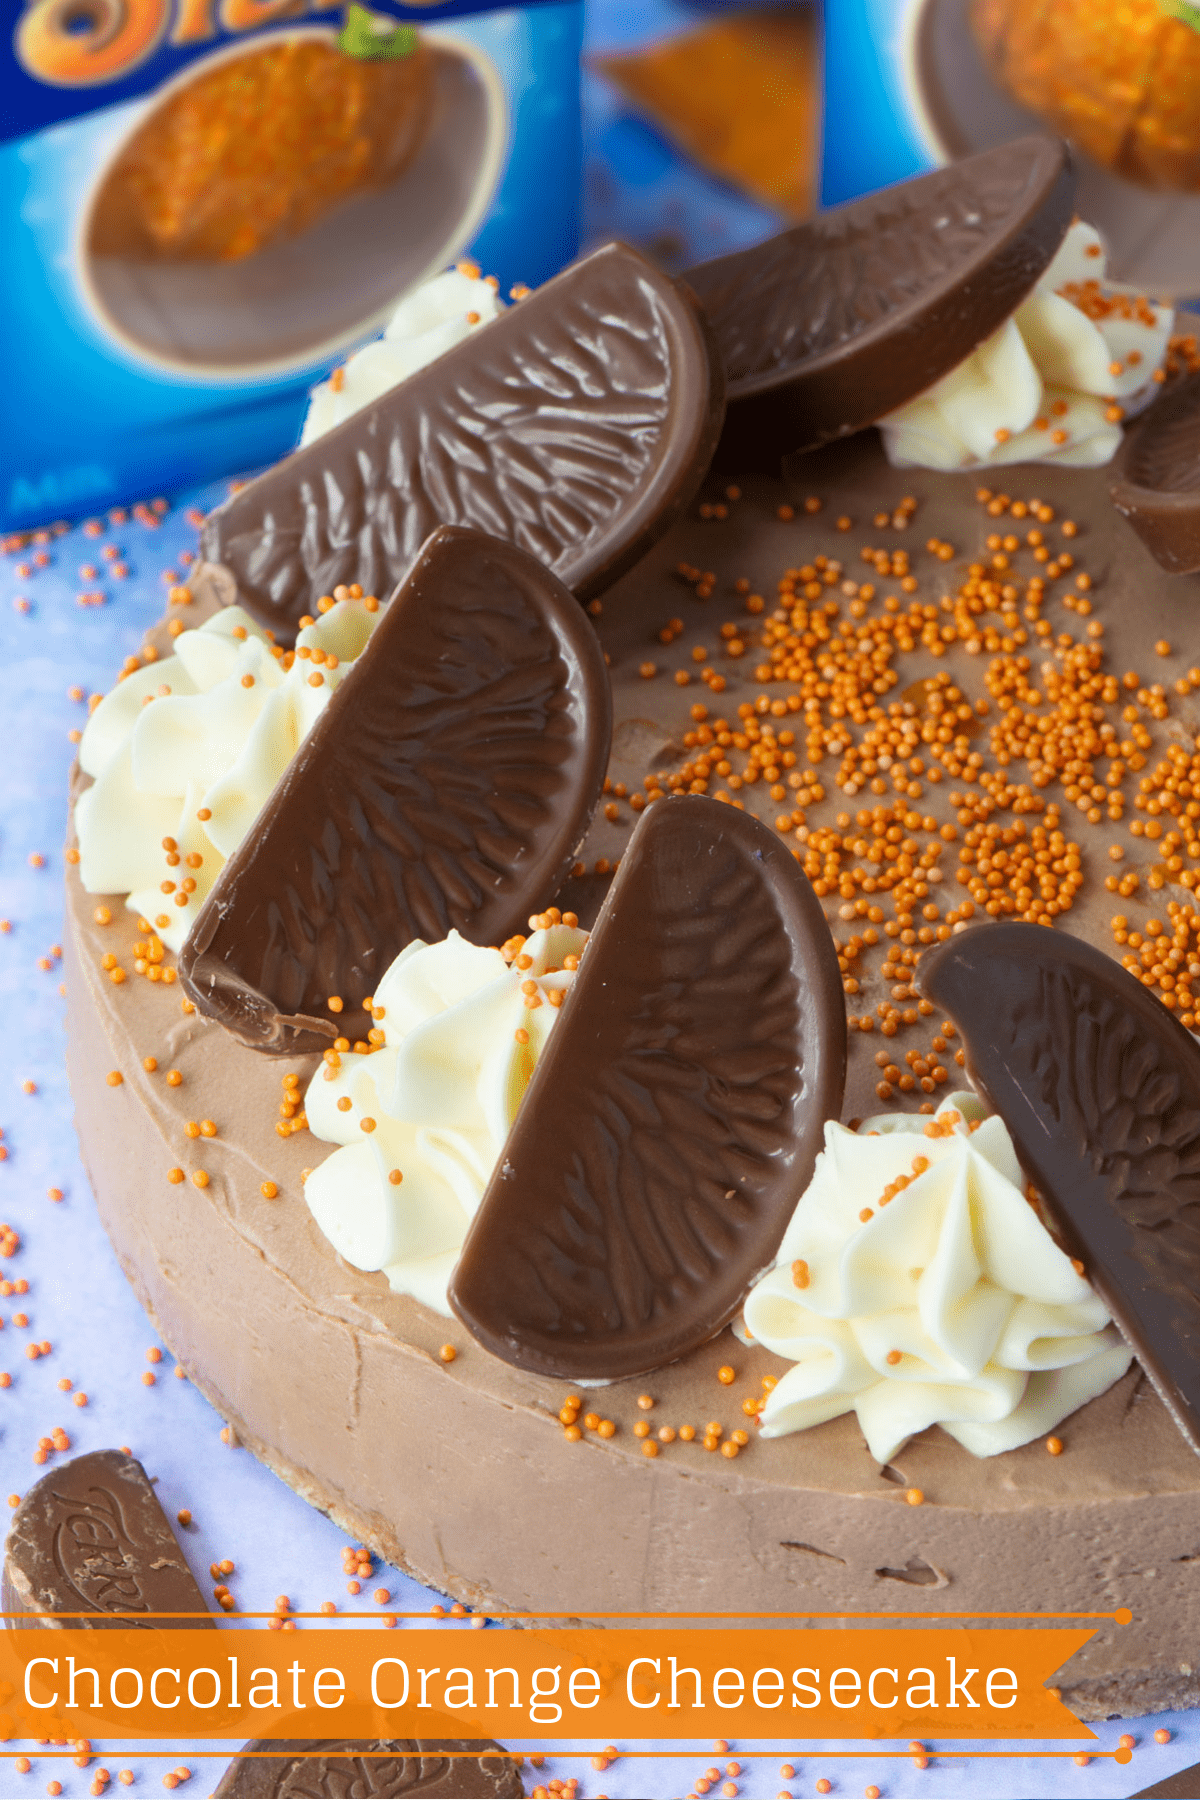 Chocolate Orange Cheesecake - A delicious and easy to make no-bake dessert. A smooth chocolate orange flavoured cheesecake topped with swirls of white chocolate orange cheesecake and slices of Chocolate Orange. A dessert lover's dream.